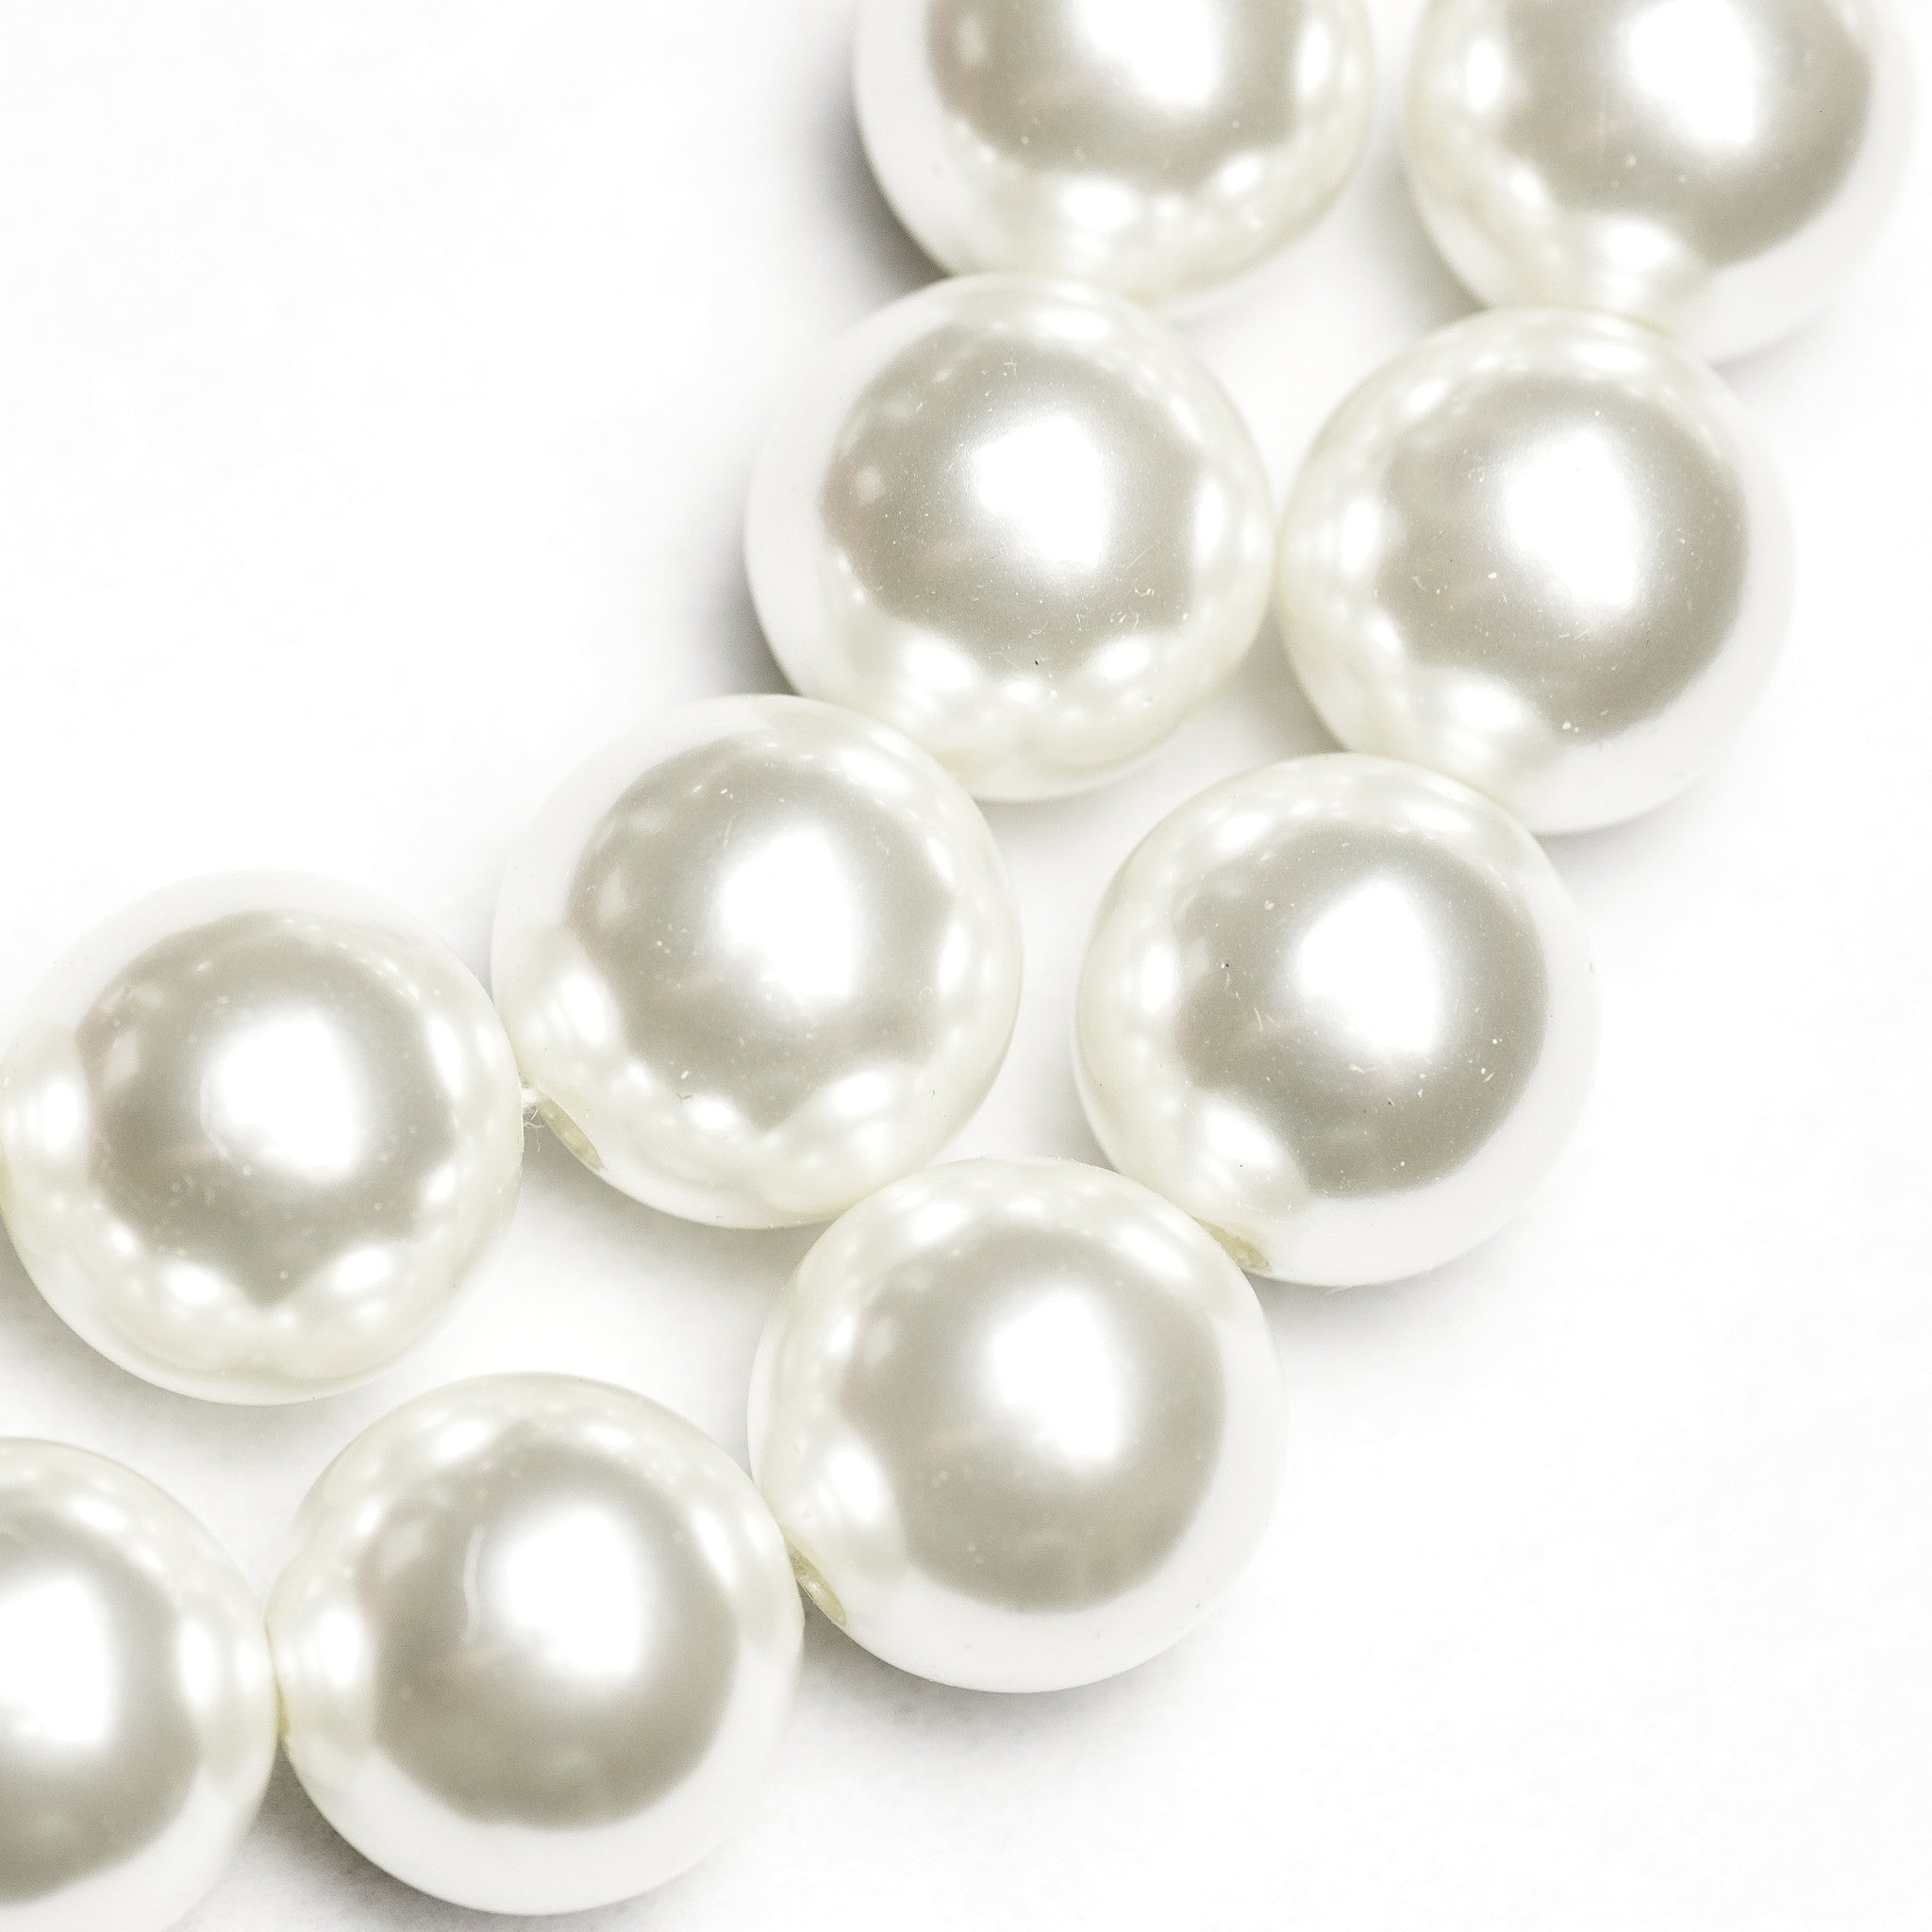 20MM White Pearl Beads 30